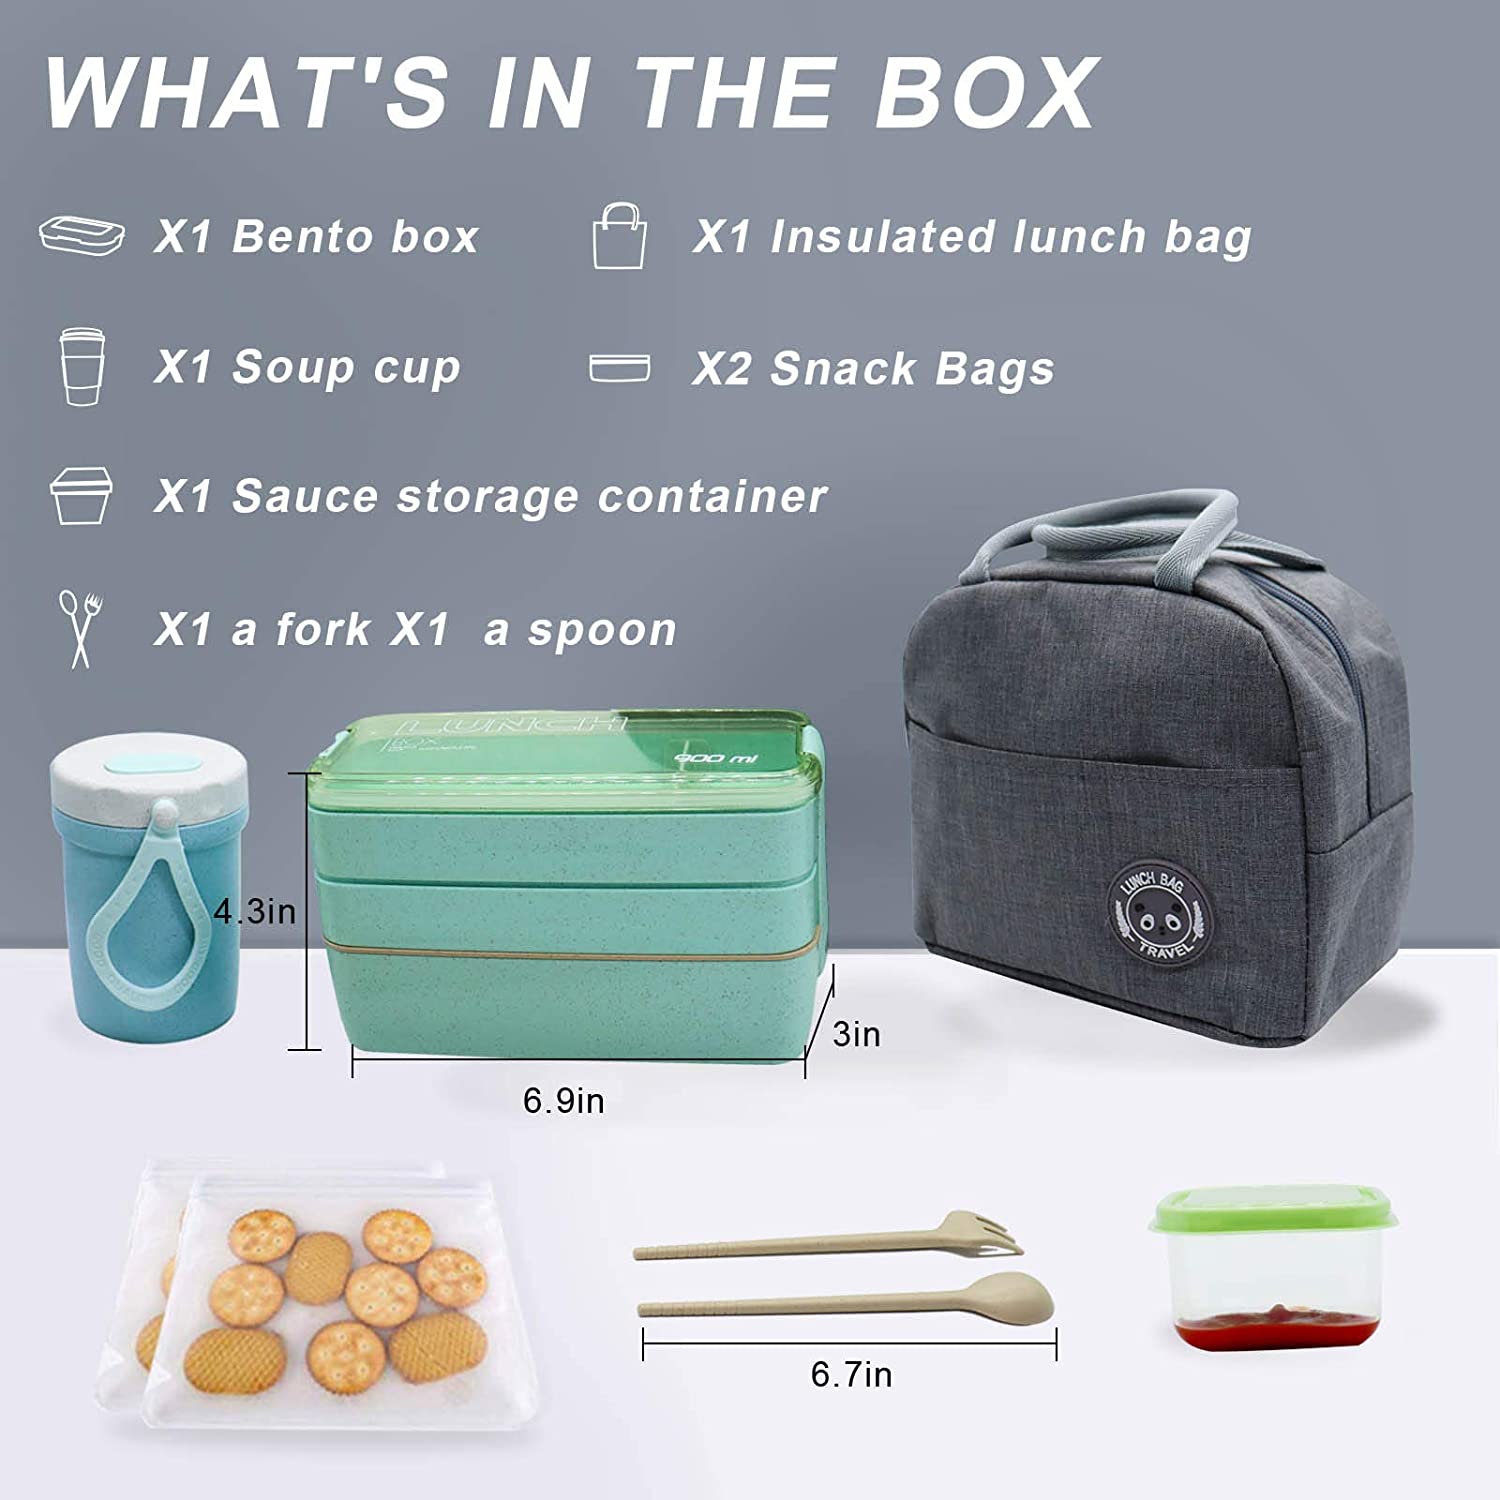 Koccido Bento Box Lunch Box Kit,Japanese Lunch Box 3-In-1 Compartment,Stackable Lunch Box Leakproof Lunch Container,Wheat Straw Bento Lunch Box for Kids and Adults